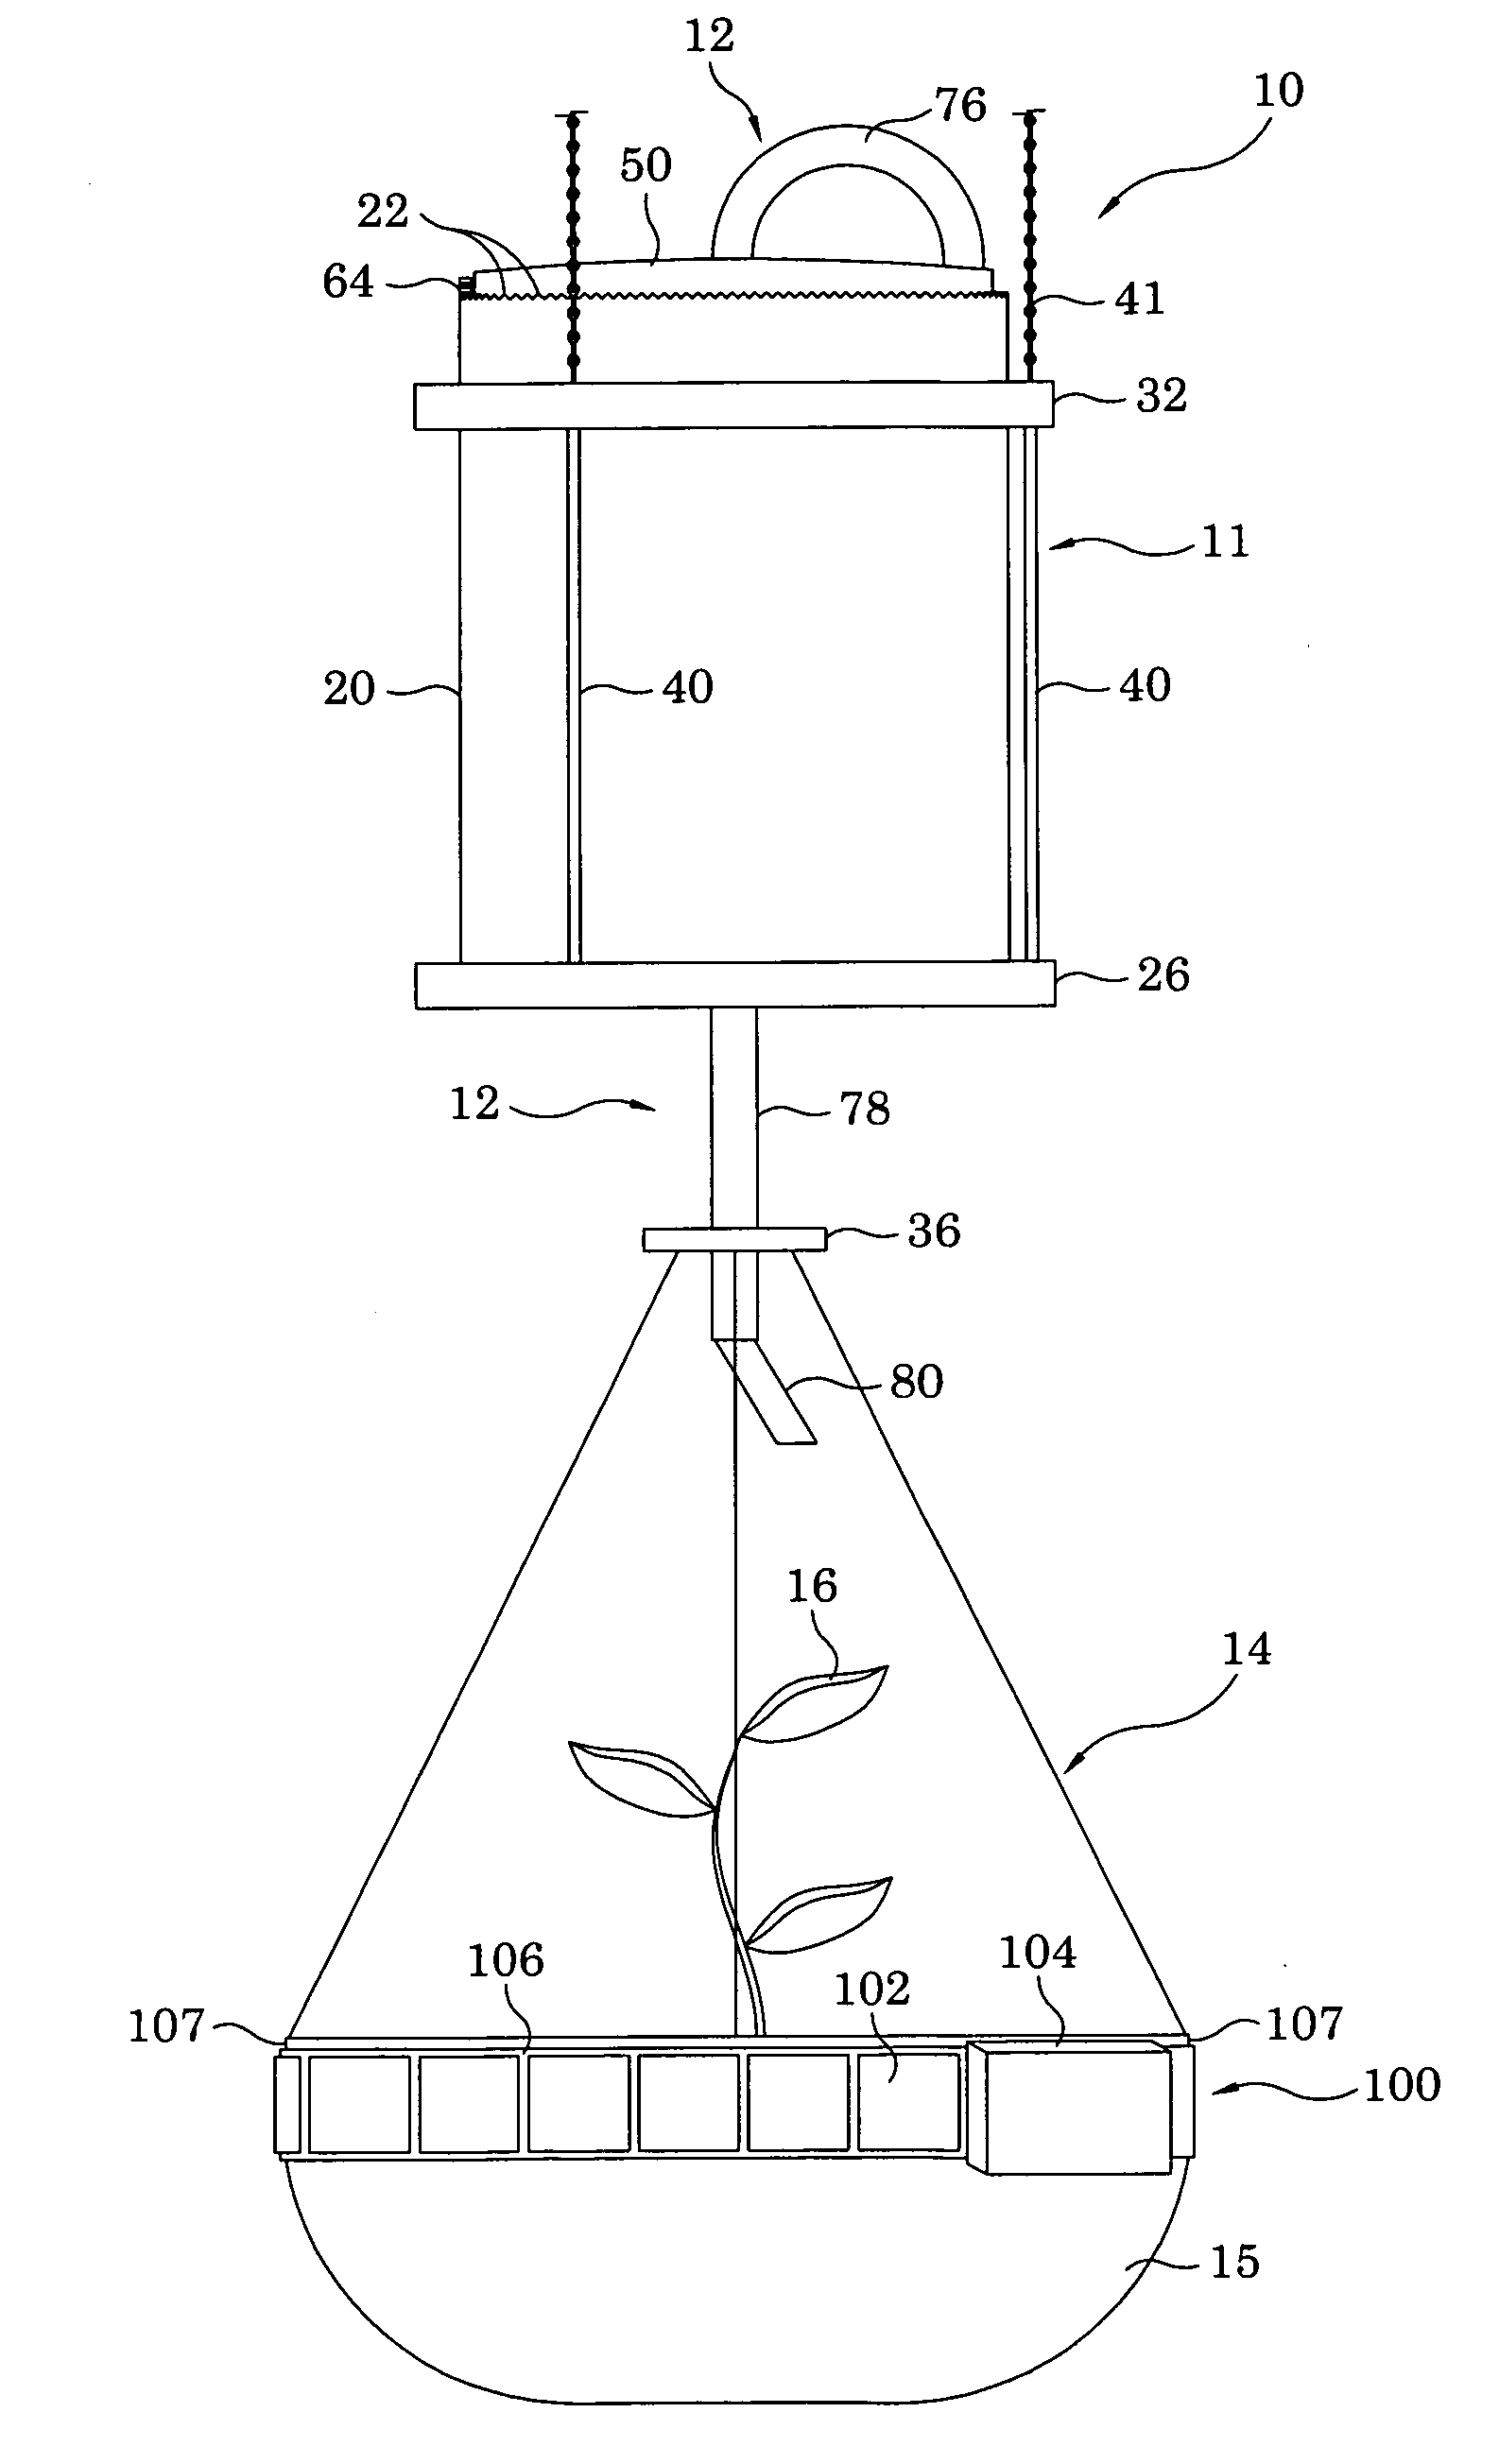 Self-contained apparatuses for hanging, holding, rotating, or watering plants using solar power for plant maintenance